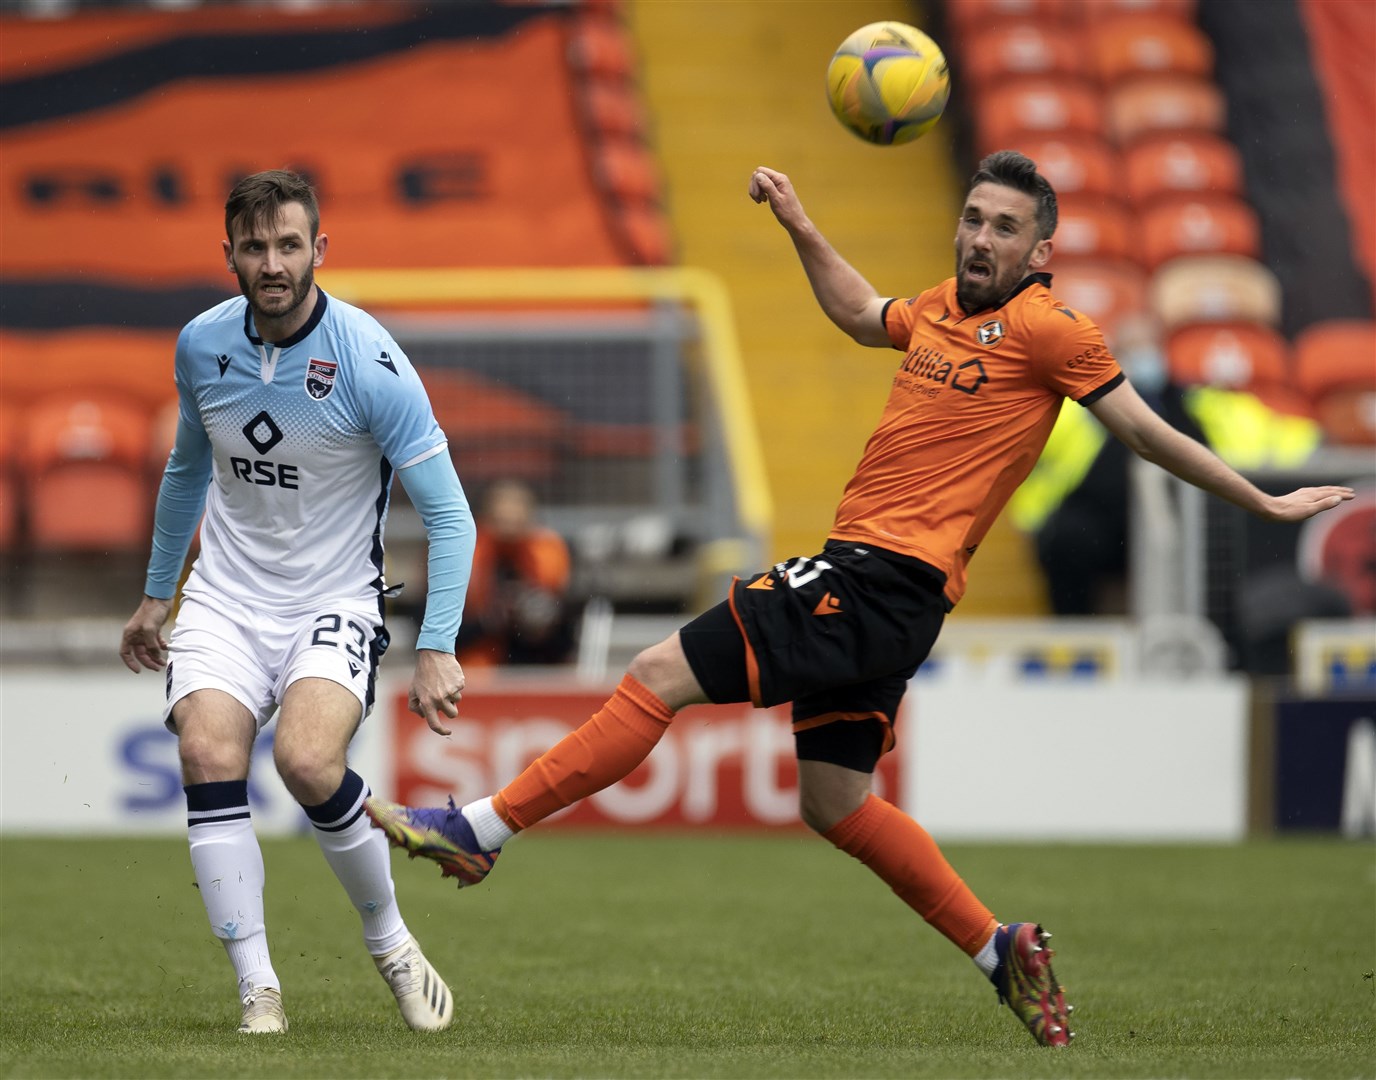 Picture - Ken Macpherson, Inverness. Dundee Utd(0) v Ross County(2). 01.05.21. Ross County's Jason Naismith clears from Dundee Utd's Nicky Clark.